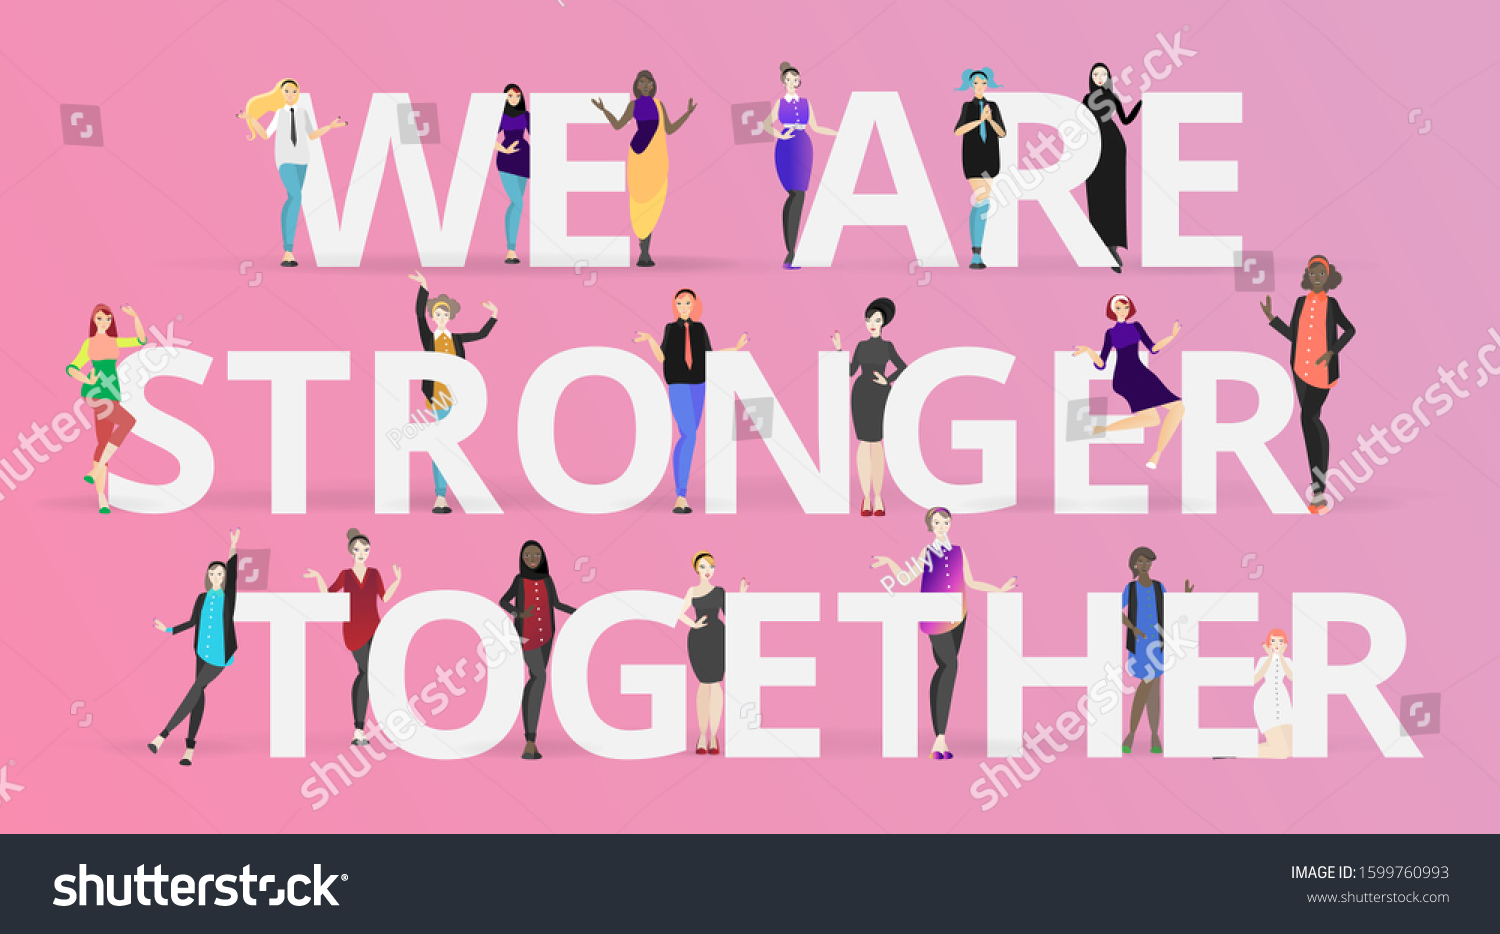 women to stand strong together.